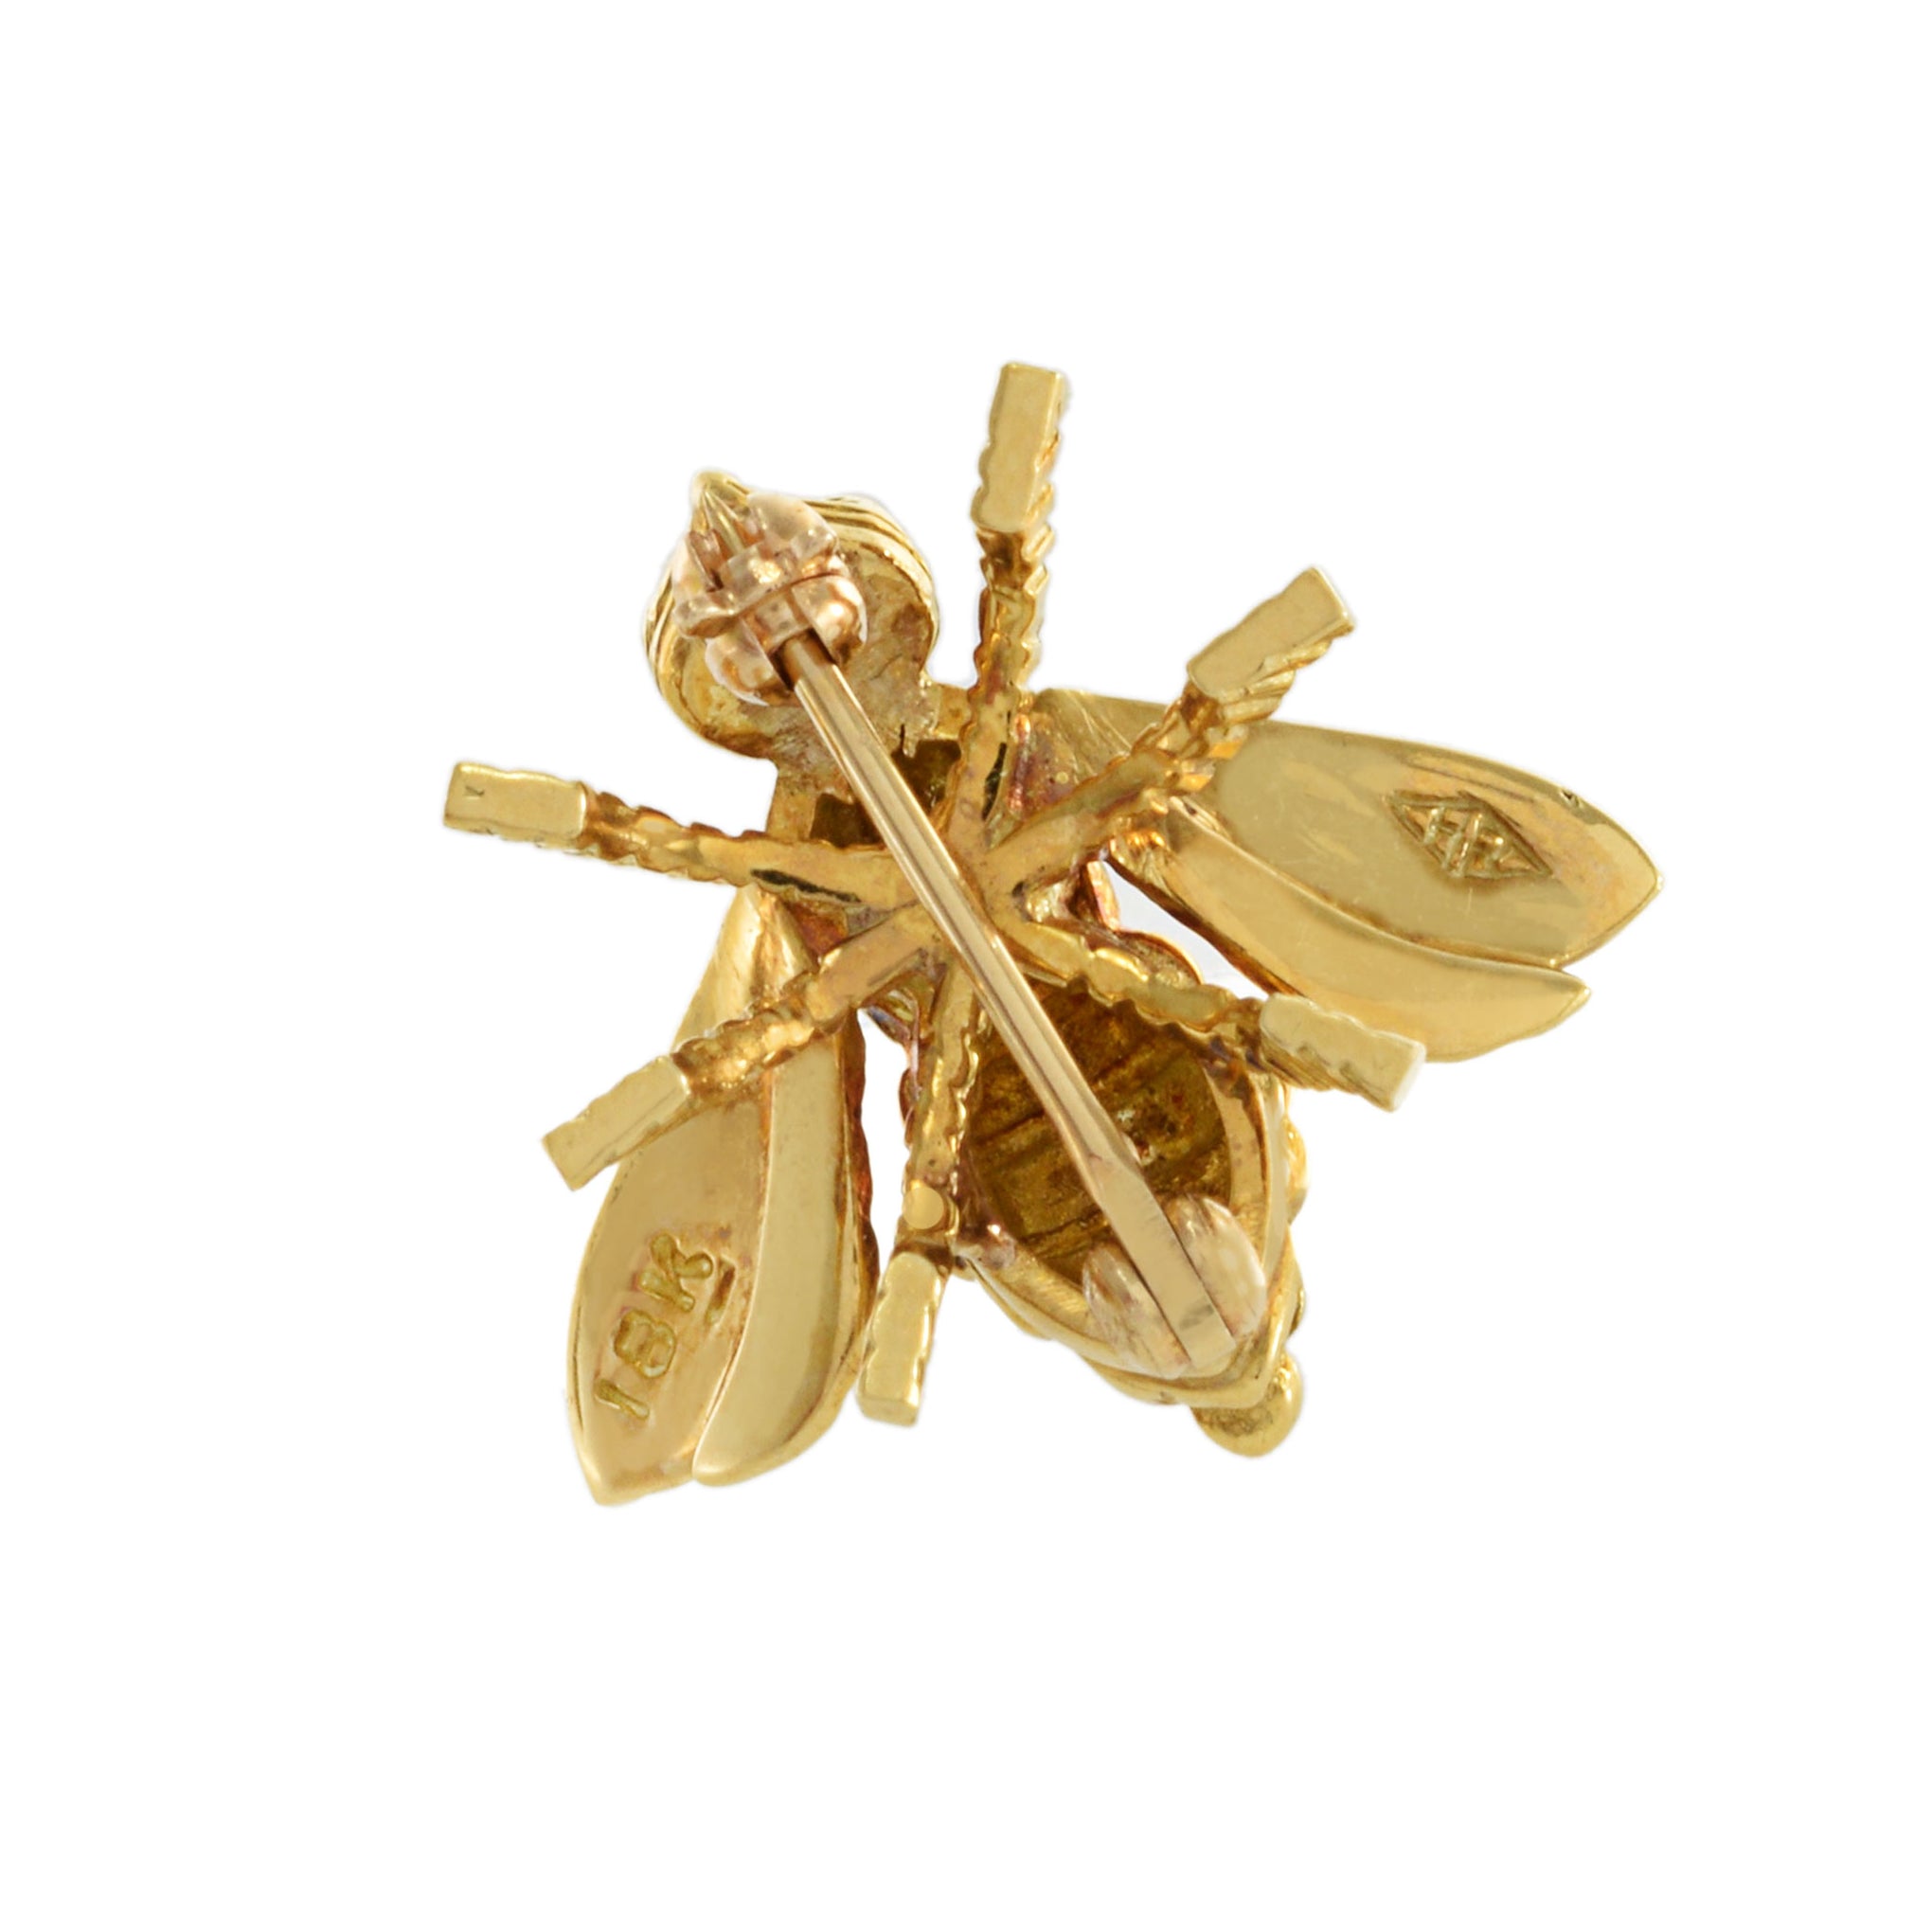 Vintage Retro 18KT Yellow Gold Fly Lapel Pin